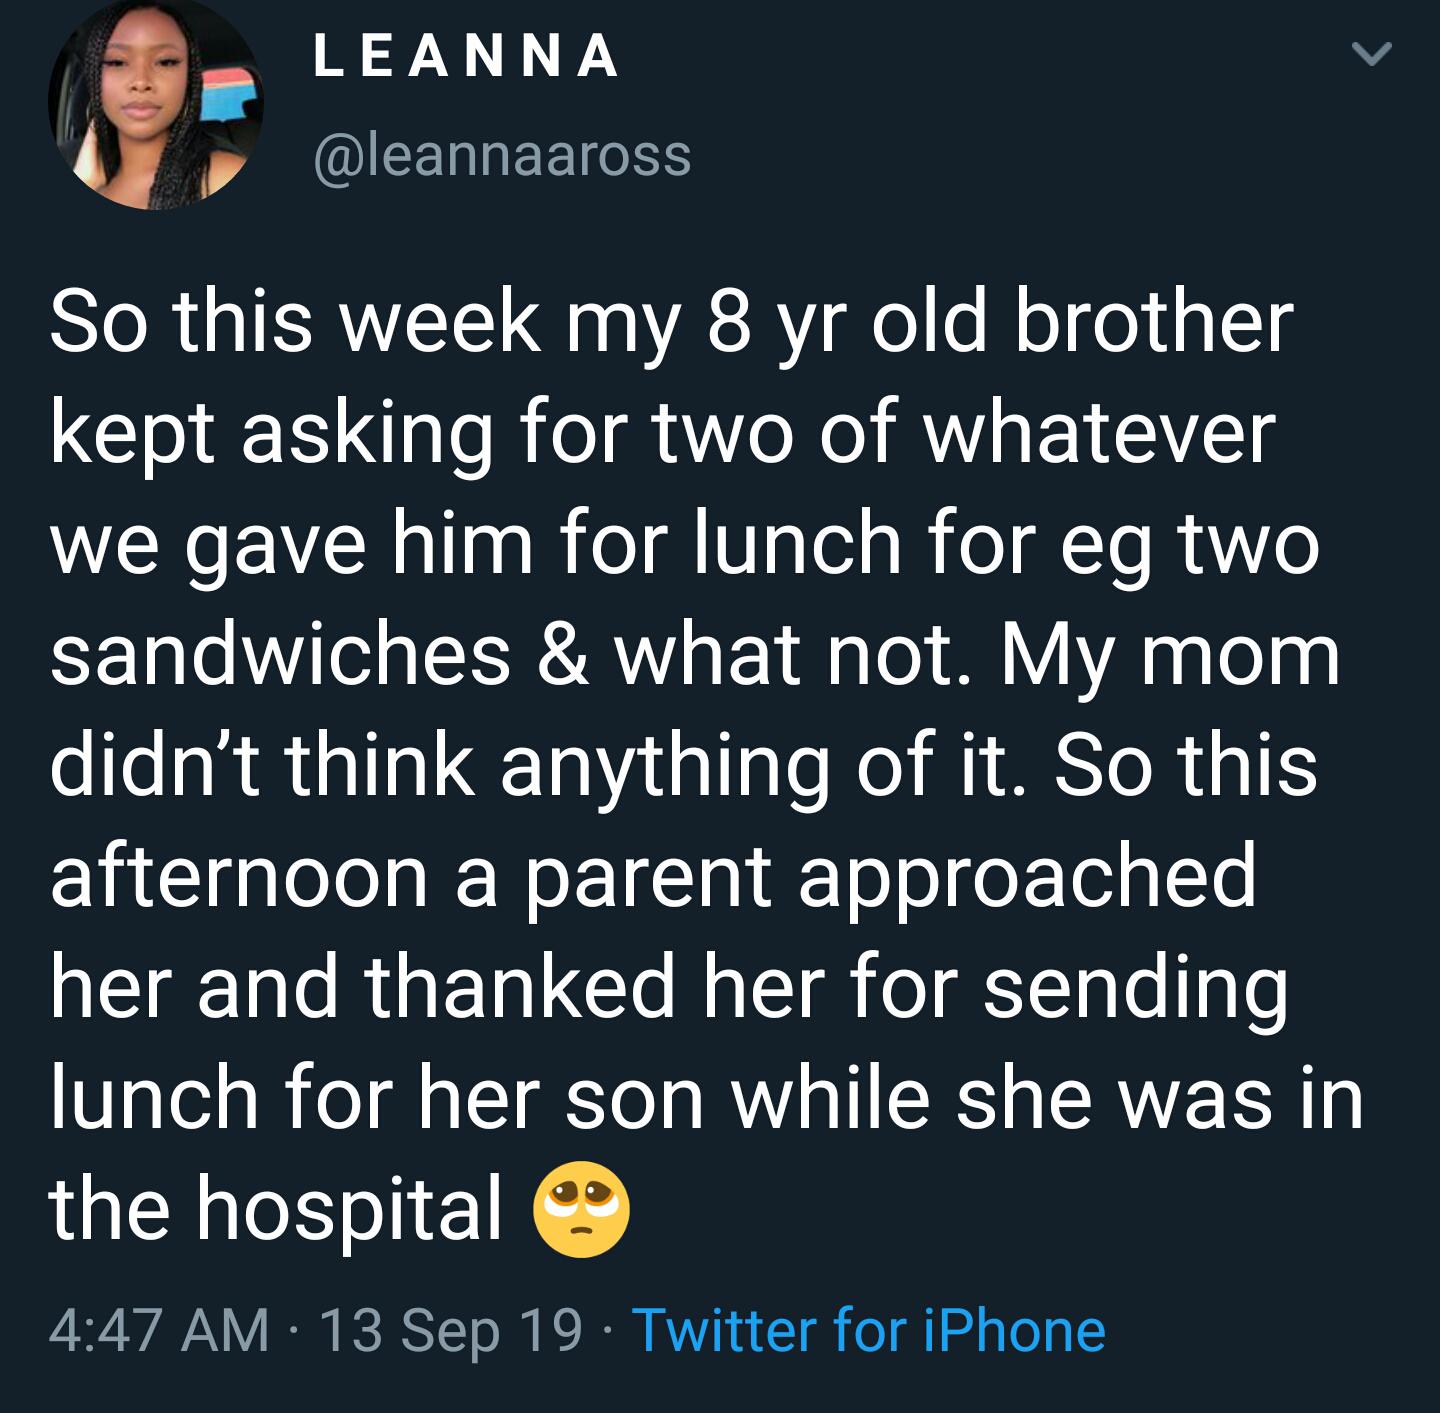 cute wholesome-memes cute text: LEANNA @eannaaross So this week my 8 yr old brother kept asking for two of whatever we gave him for lunch for eg two sandwiches & what not. My mom didn't think anything of it. So this afternoon a parent approached her and thanked her for sending lunch for her son while she was in the hospital 4:47 AM • 13 Sep 19 • Twitter for iPhone 